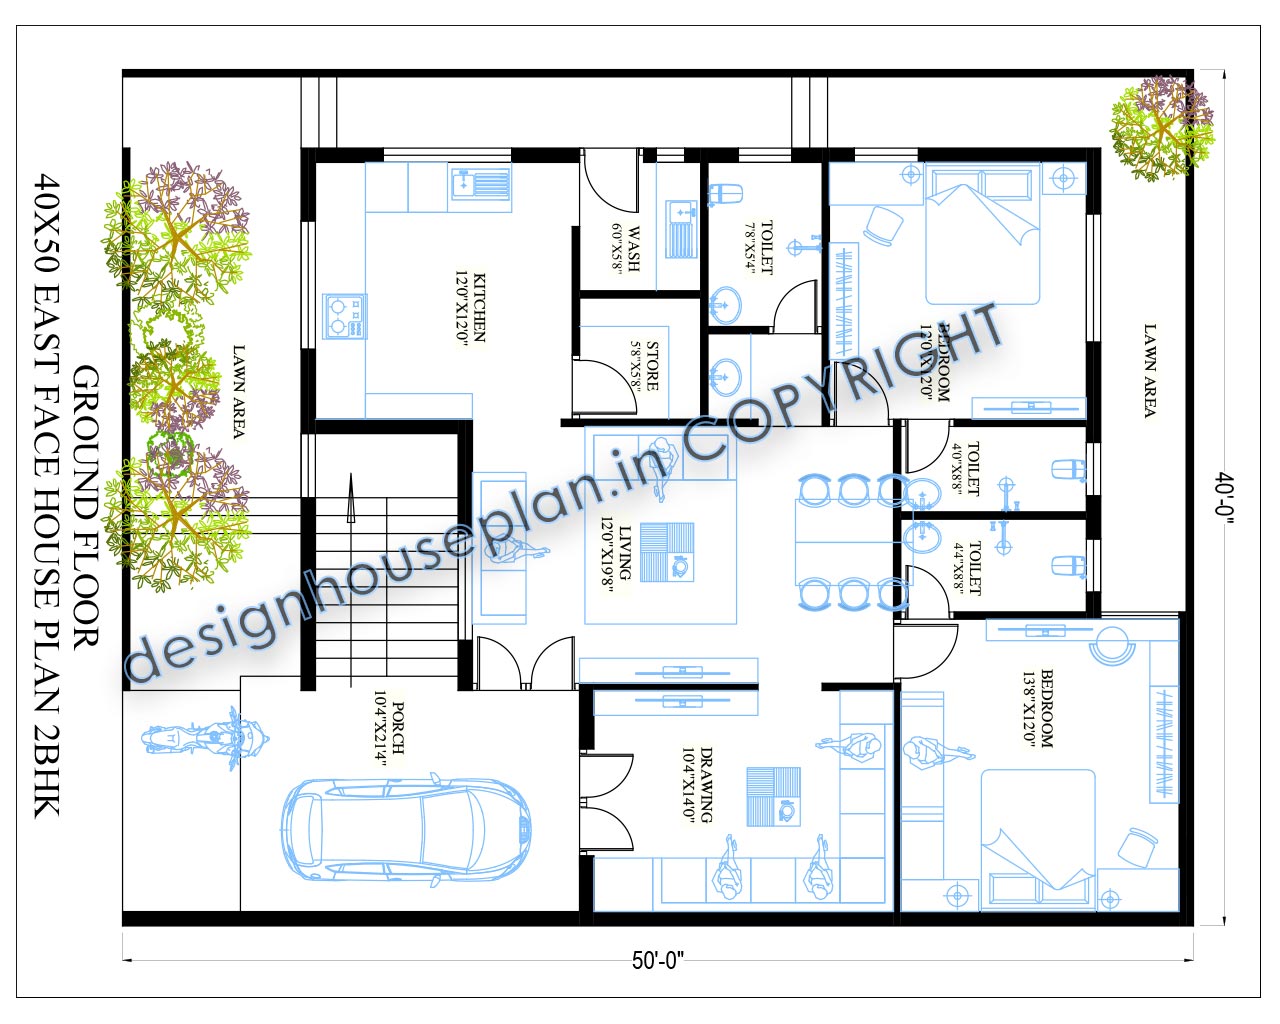 This is an east facing 2 bedroom house plan with a parking area and the size of the plot area is 40x50 feet.